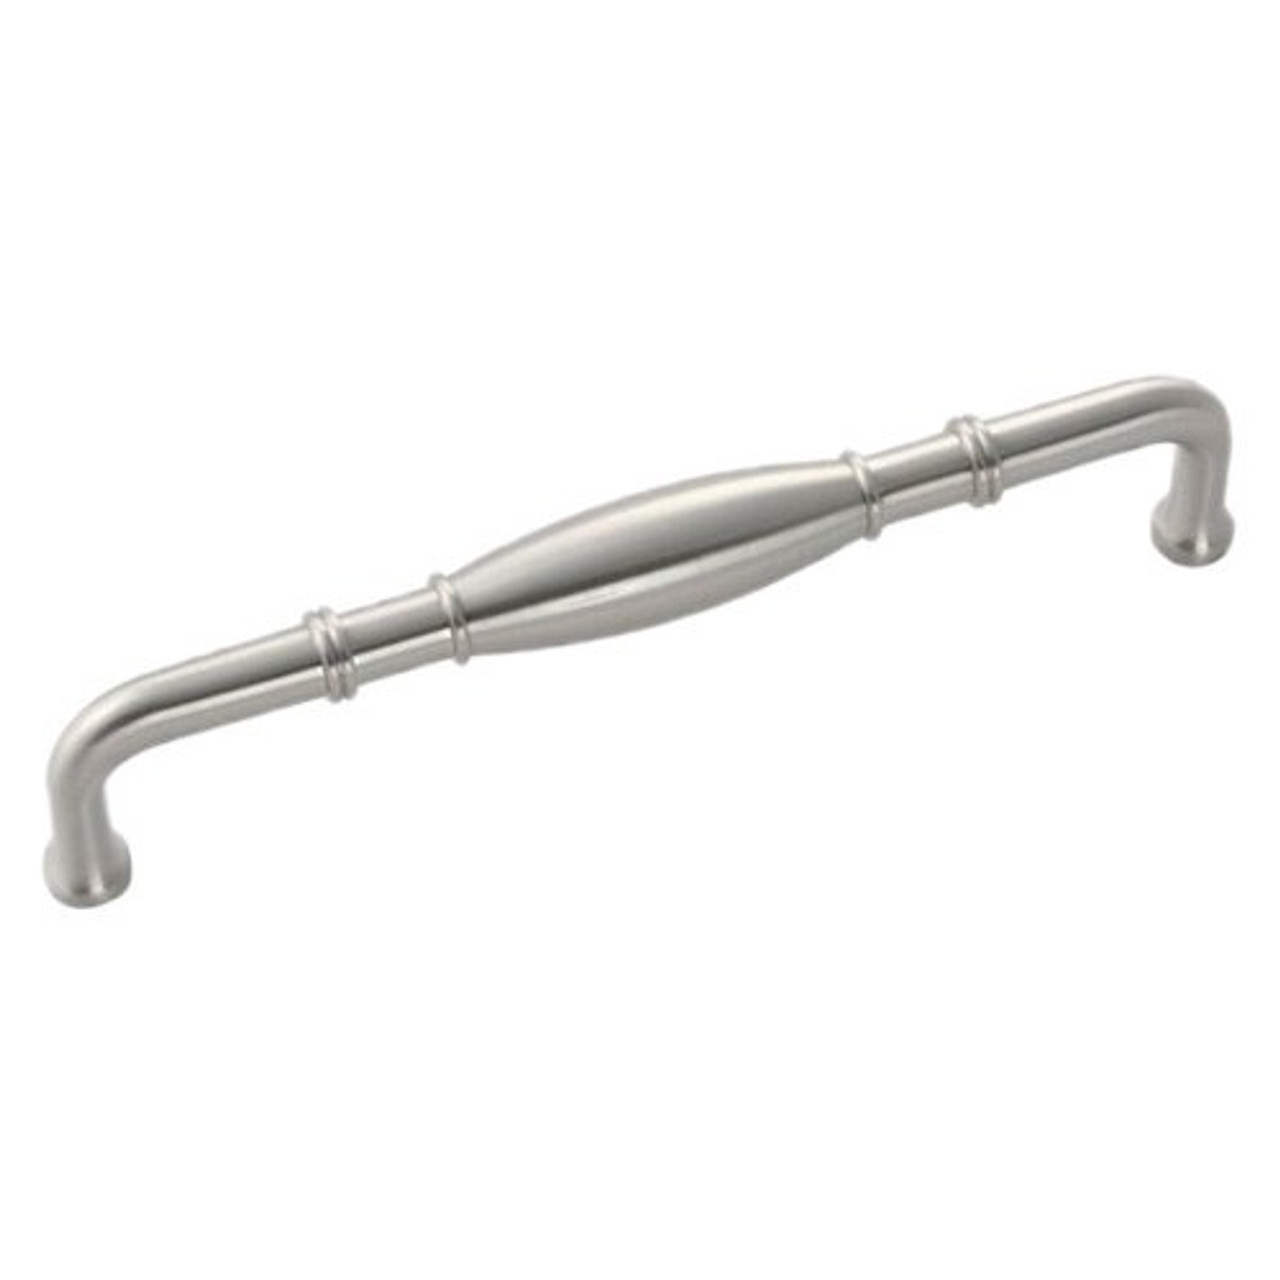 Hickory Hardware WILLIAMSBURG CABINET PULLS 3"- 3-3/4" - 5-1/16" available Centers